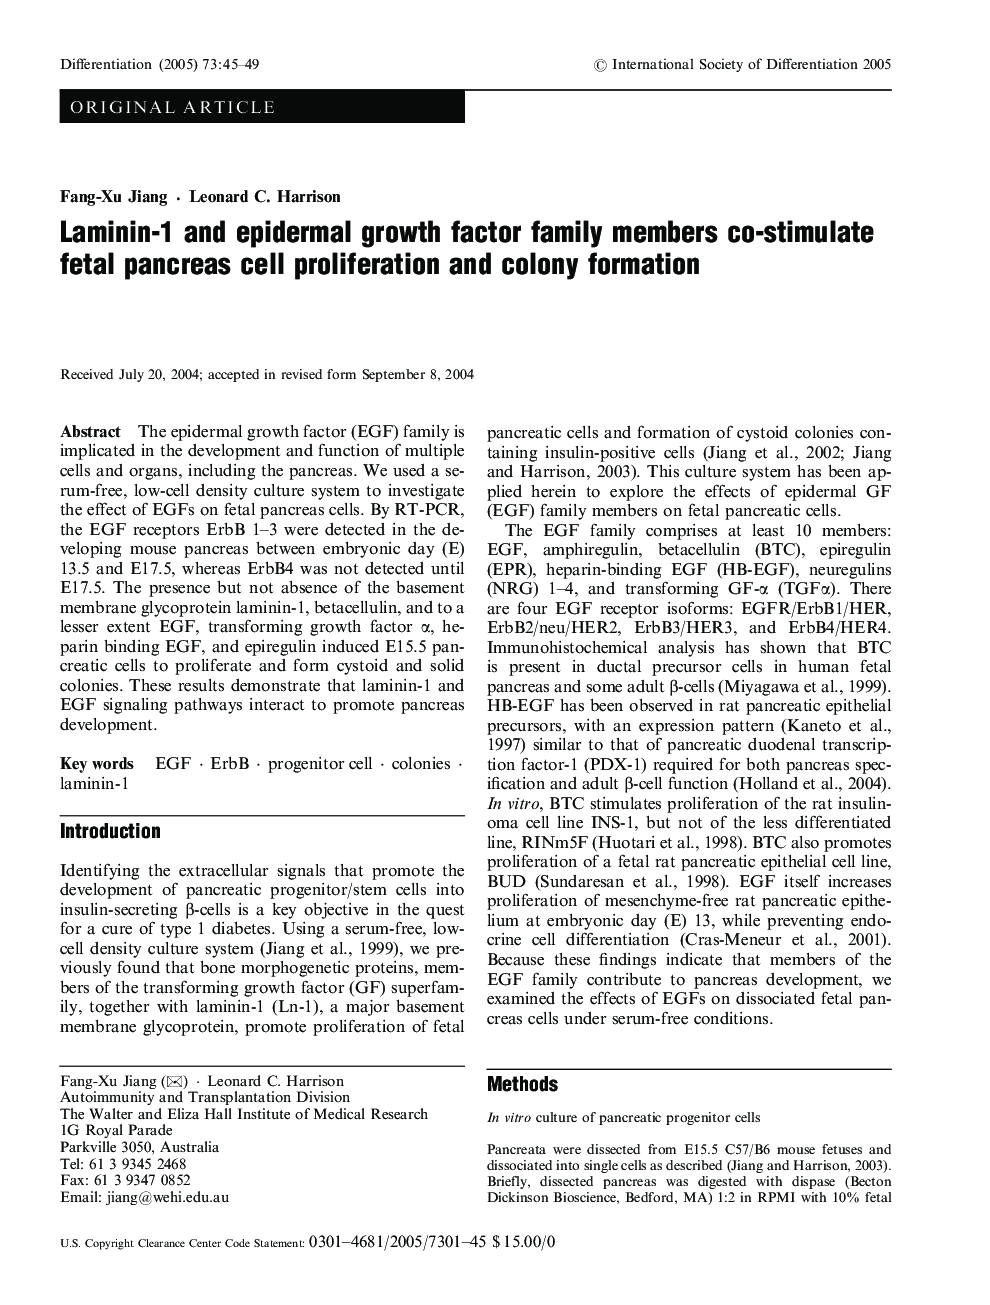 Laminin-1 and epidermal growth factor family members co-stimulate fetal pancreas cell proliferation and colony formation